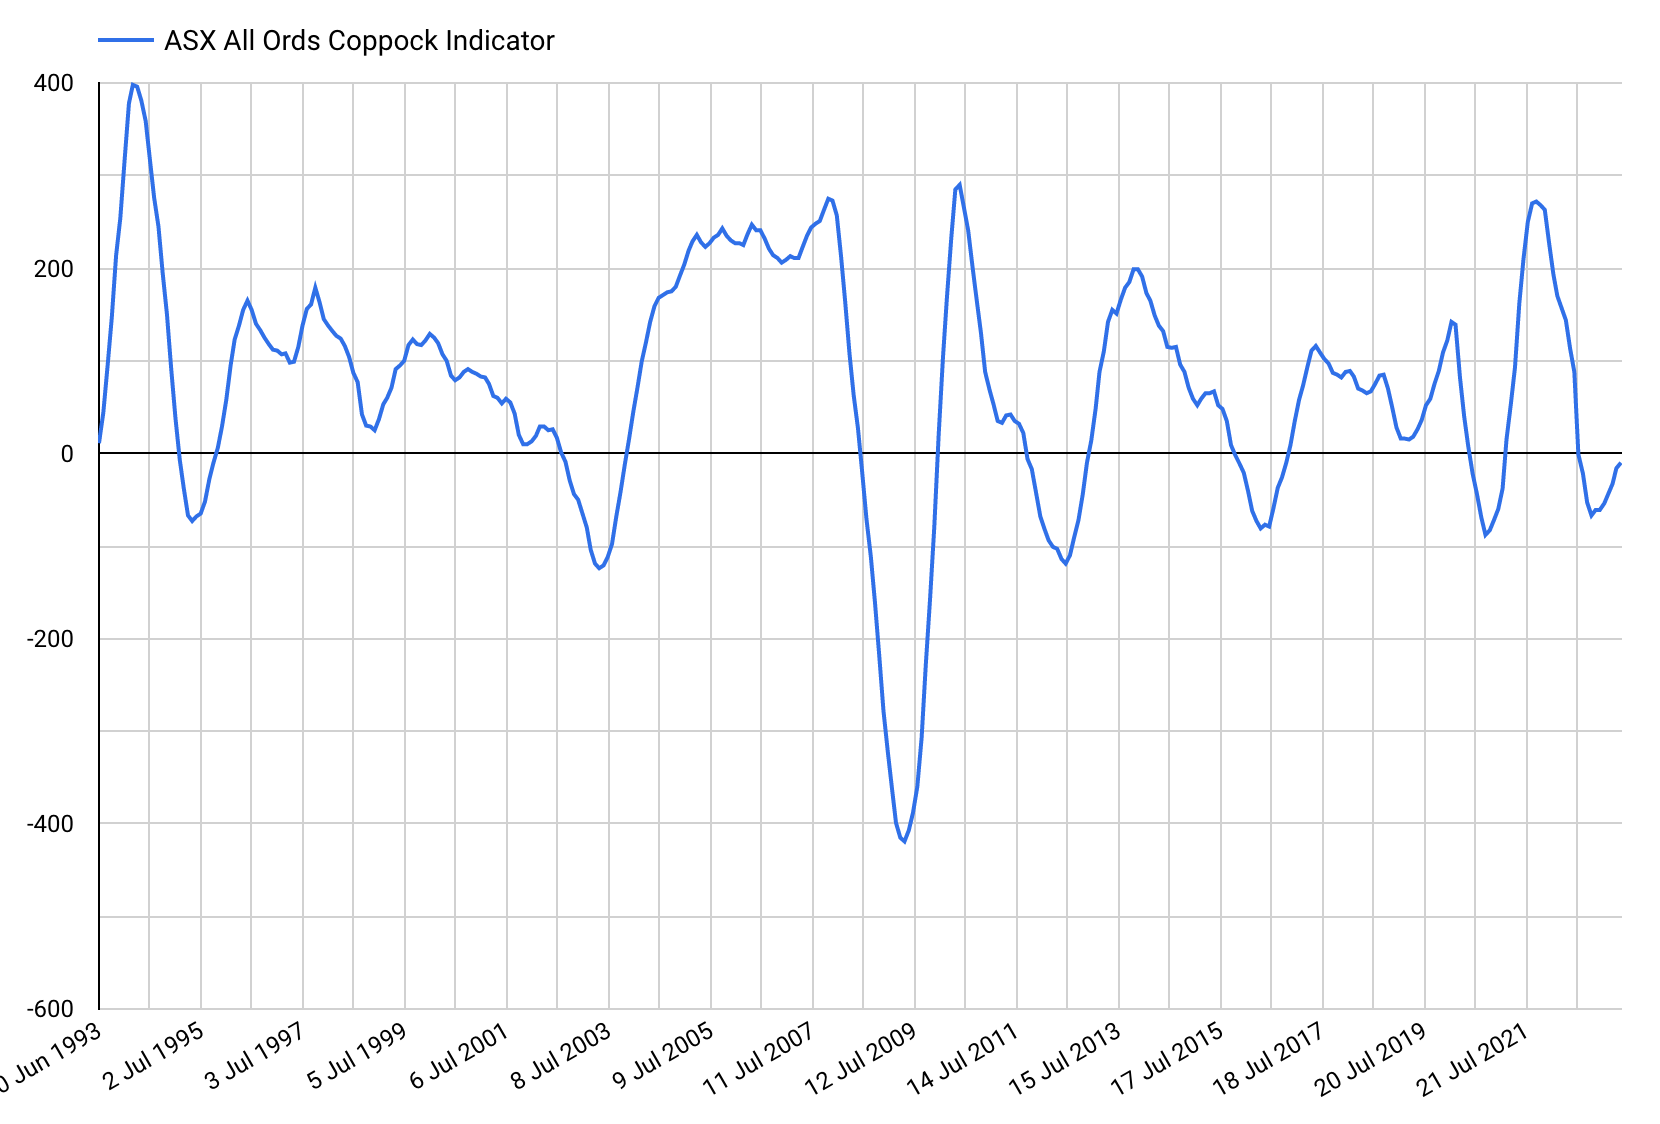 The past 30 years of the Coppock Indicator. Use this link to track the ASX All Ords Coppock Indicator.